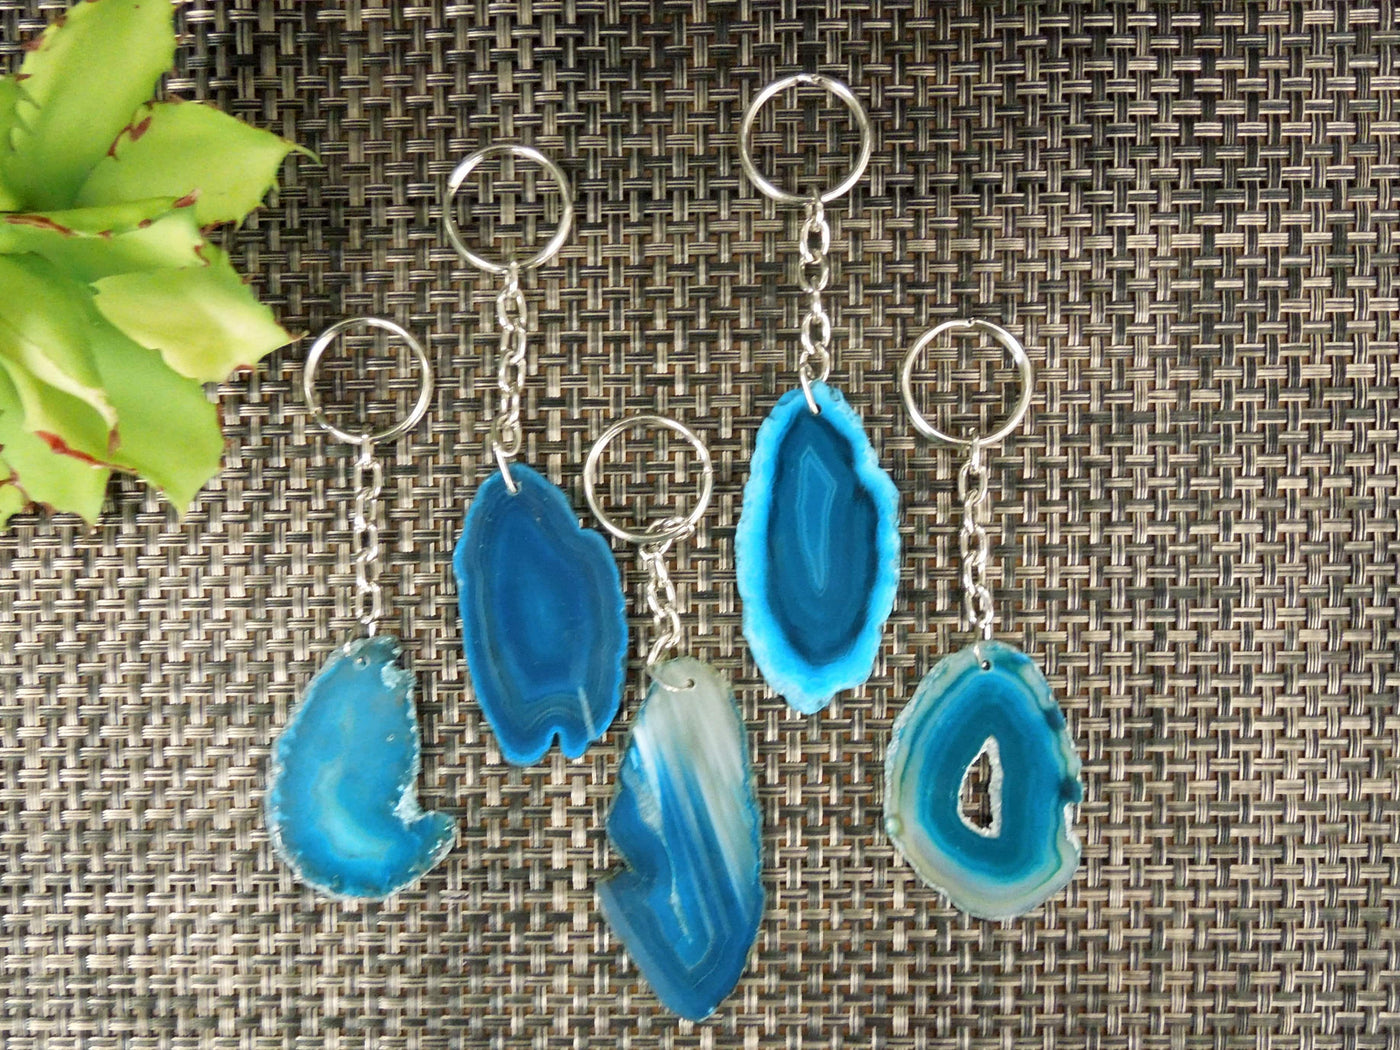 Multiple teal agate keychains on a dark colored background displaying color, size, pattern and shape variation.